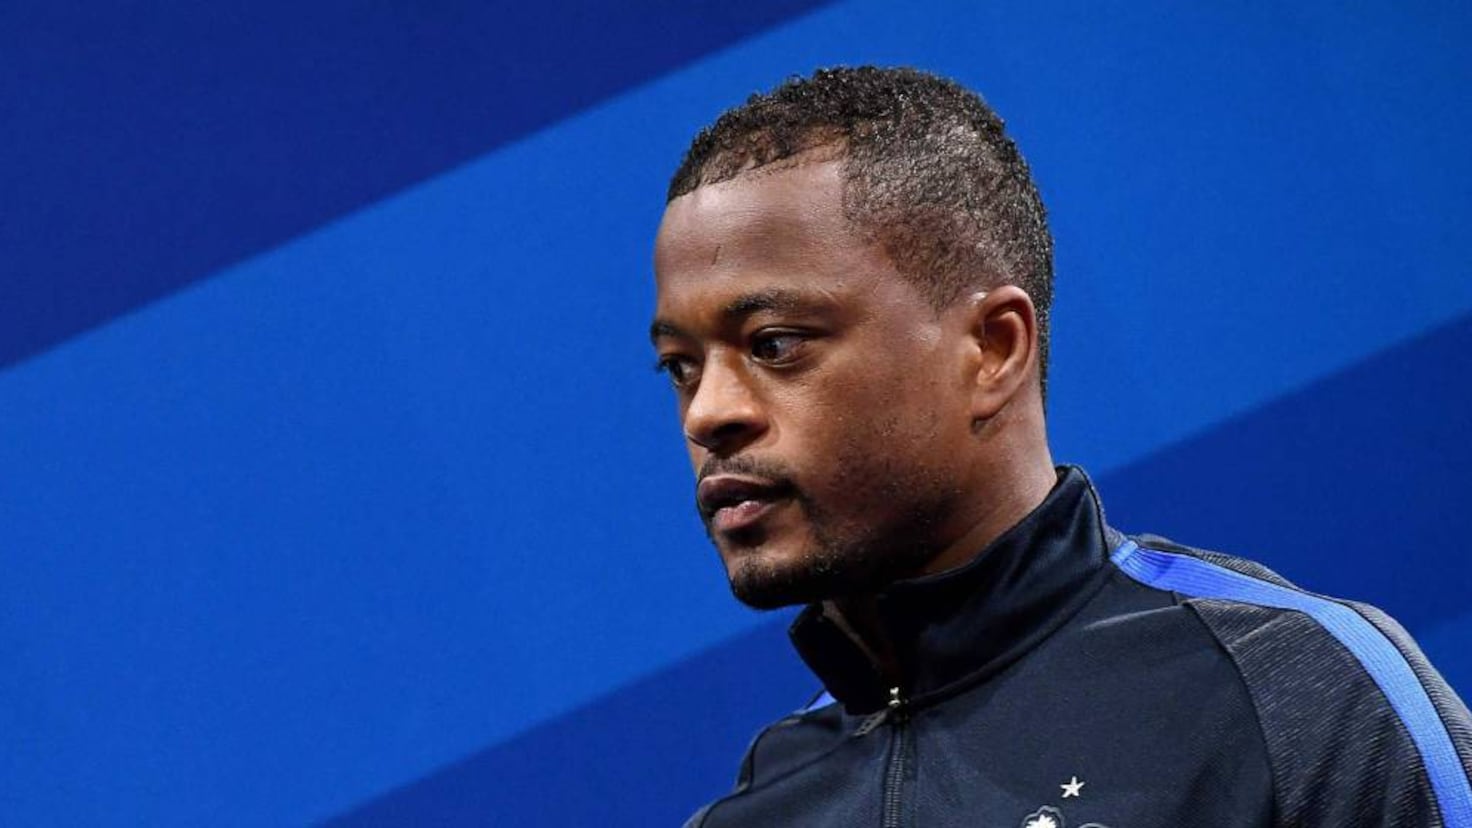 Patrice Evra, sentenced to one year in prison for family neglect